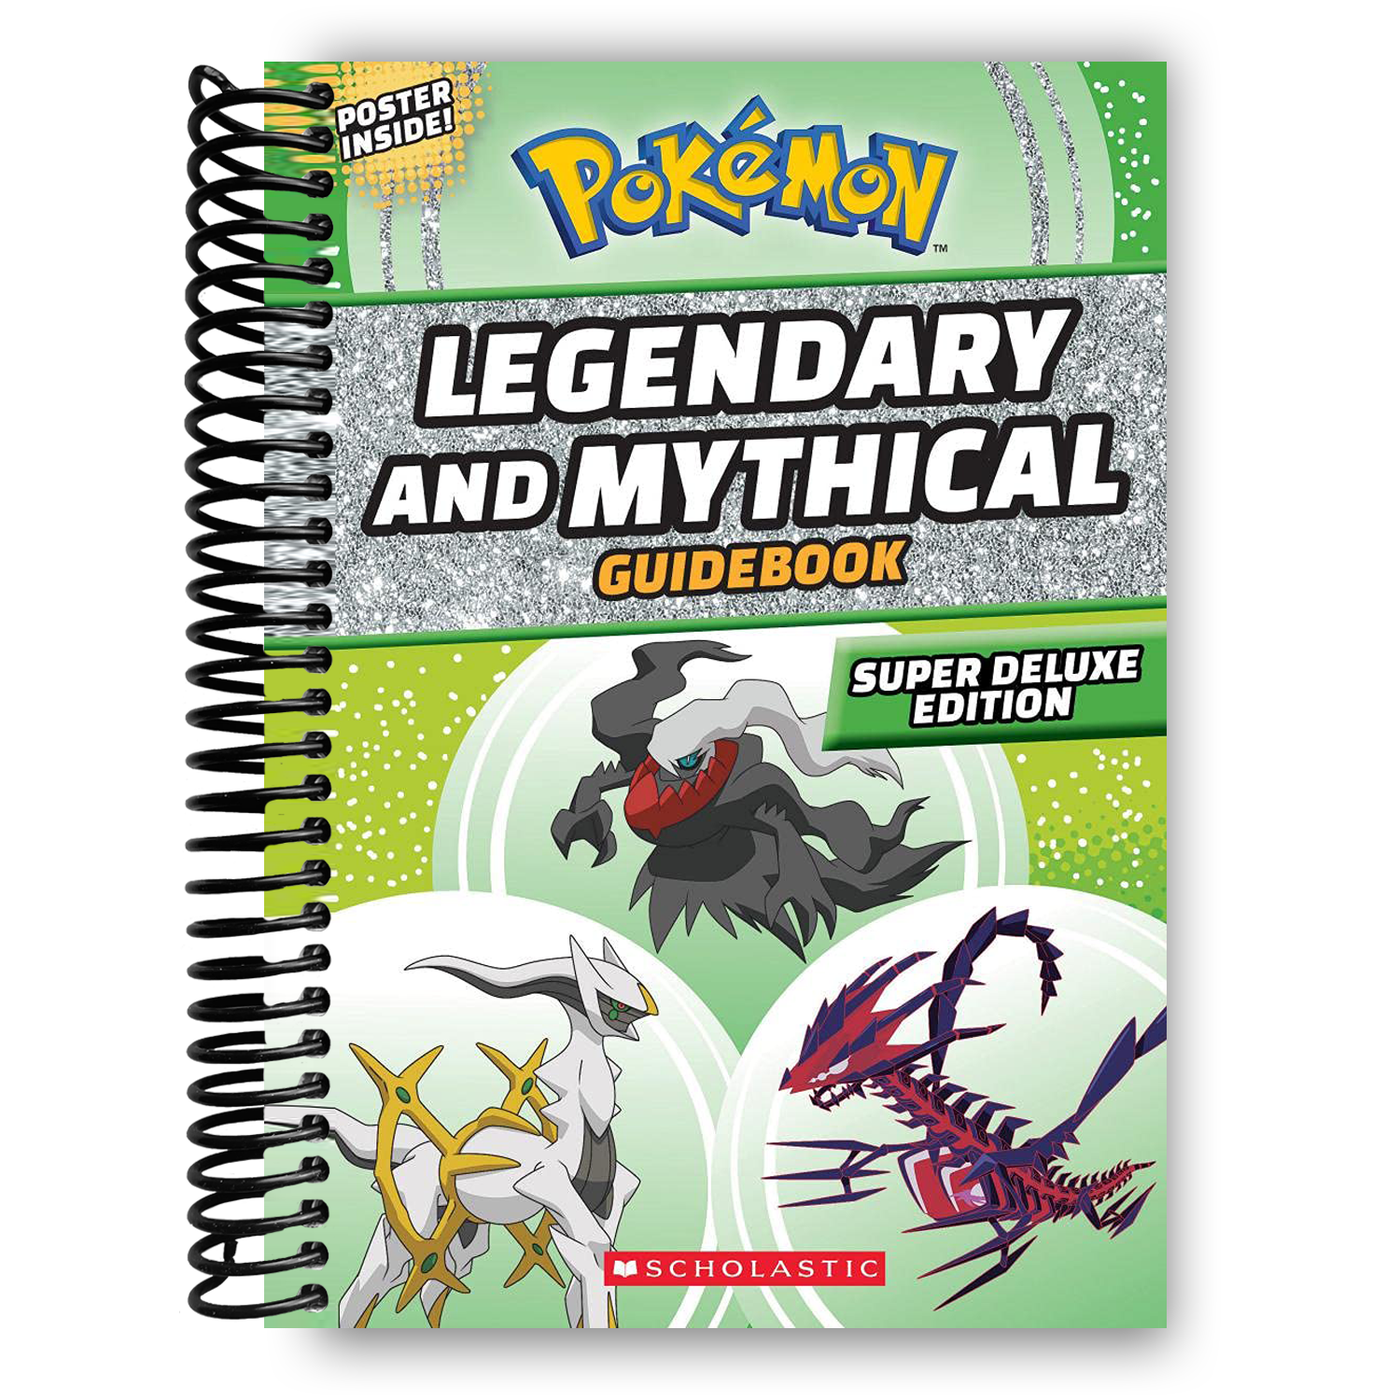 Legendary and Mythical Guidebook: Super Deluxe Edition (Pokémon) (Spiral Bound)